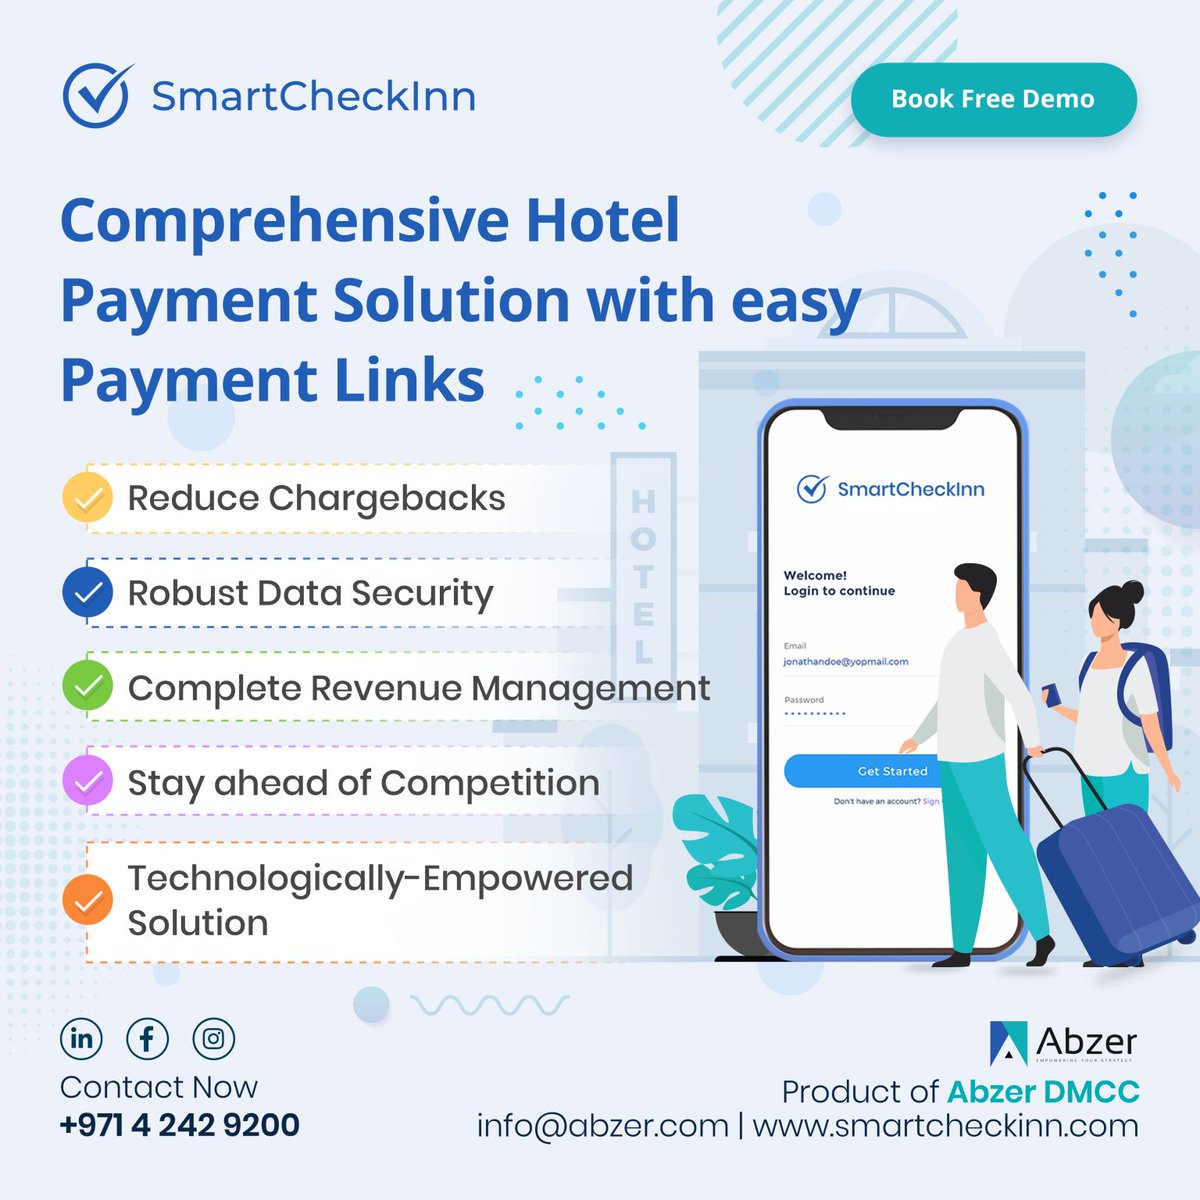 Looking for a hotel management solution to automate your daily processes?  

Look no more, SmartCheckinn is a complete hotel payment solution with integrated online payment automation  

smartcheckinn.com 

#abzer #hotels #hoteliers #Revenuemanagement #automation